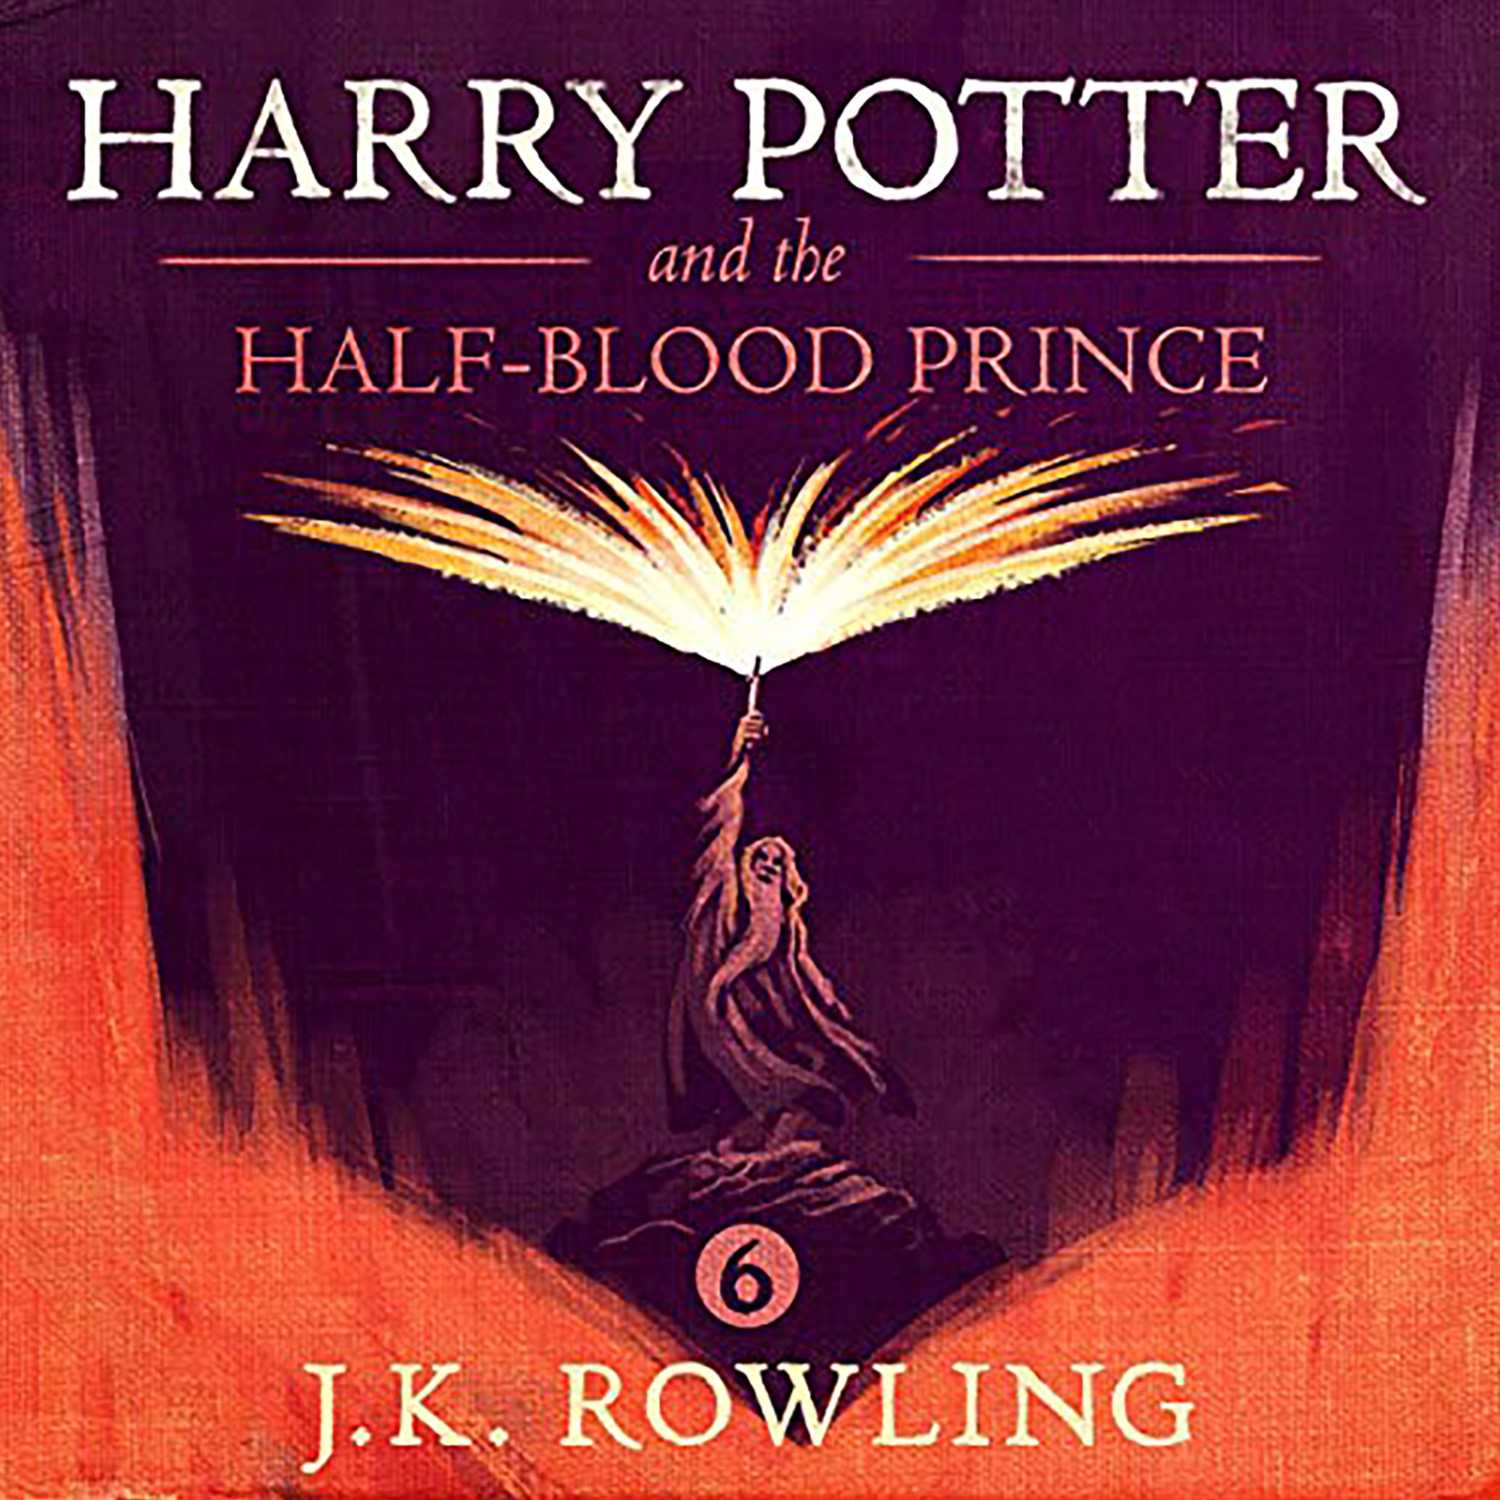 Harry Potter and the Half-Blood Prince Part 1